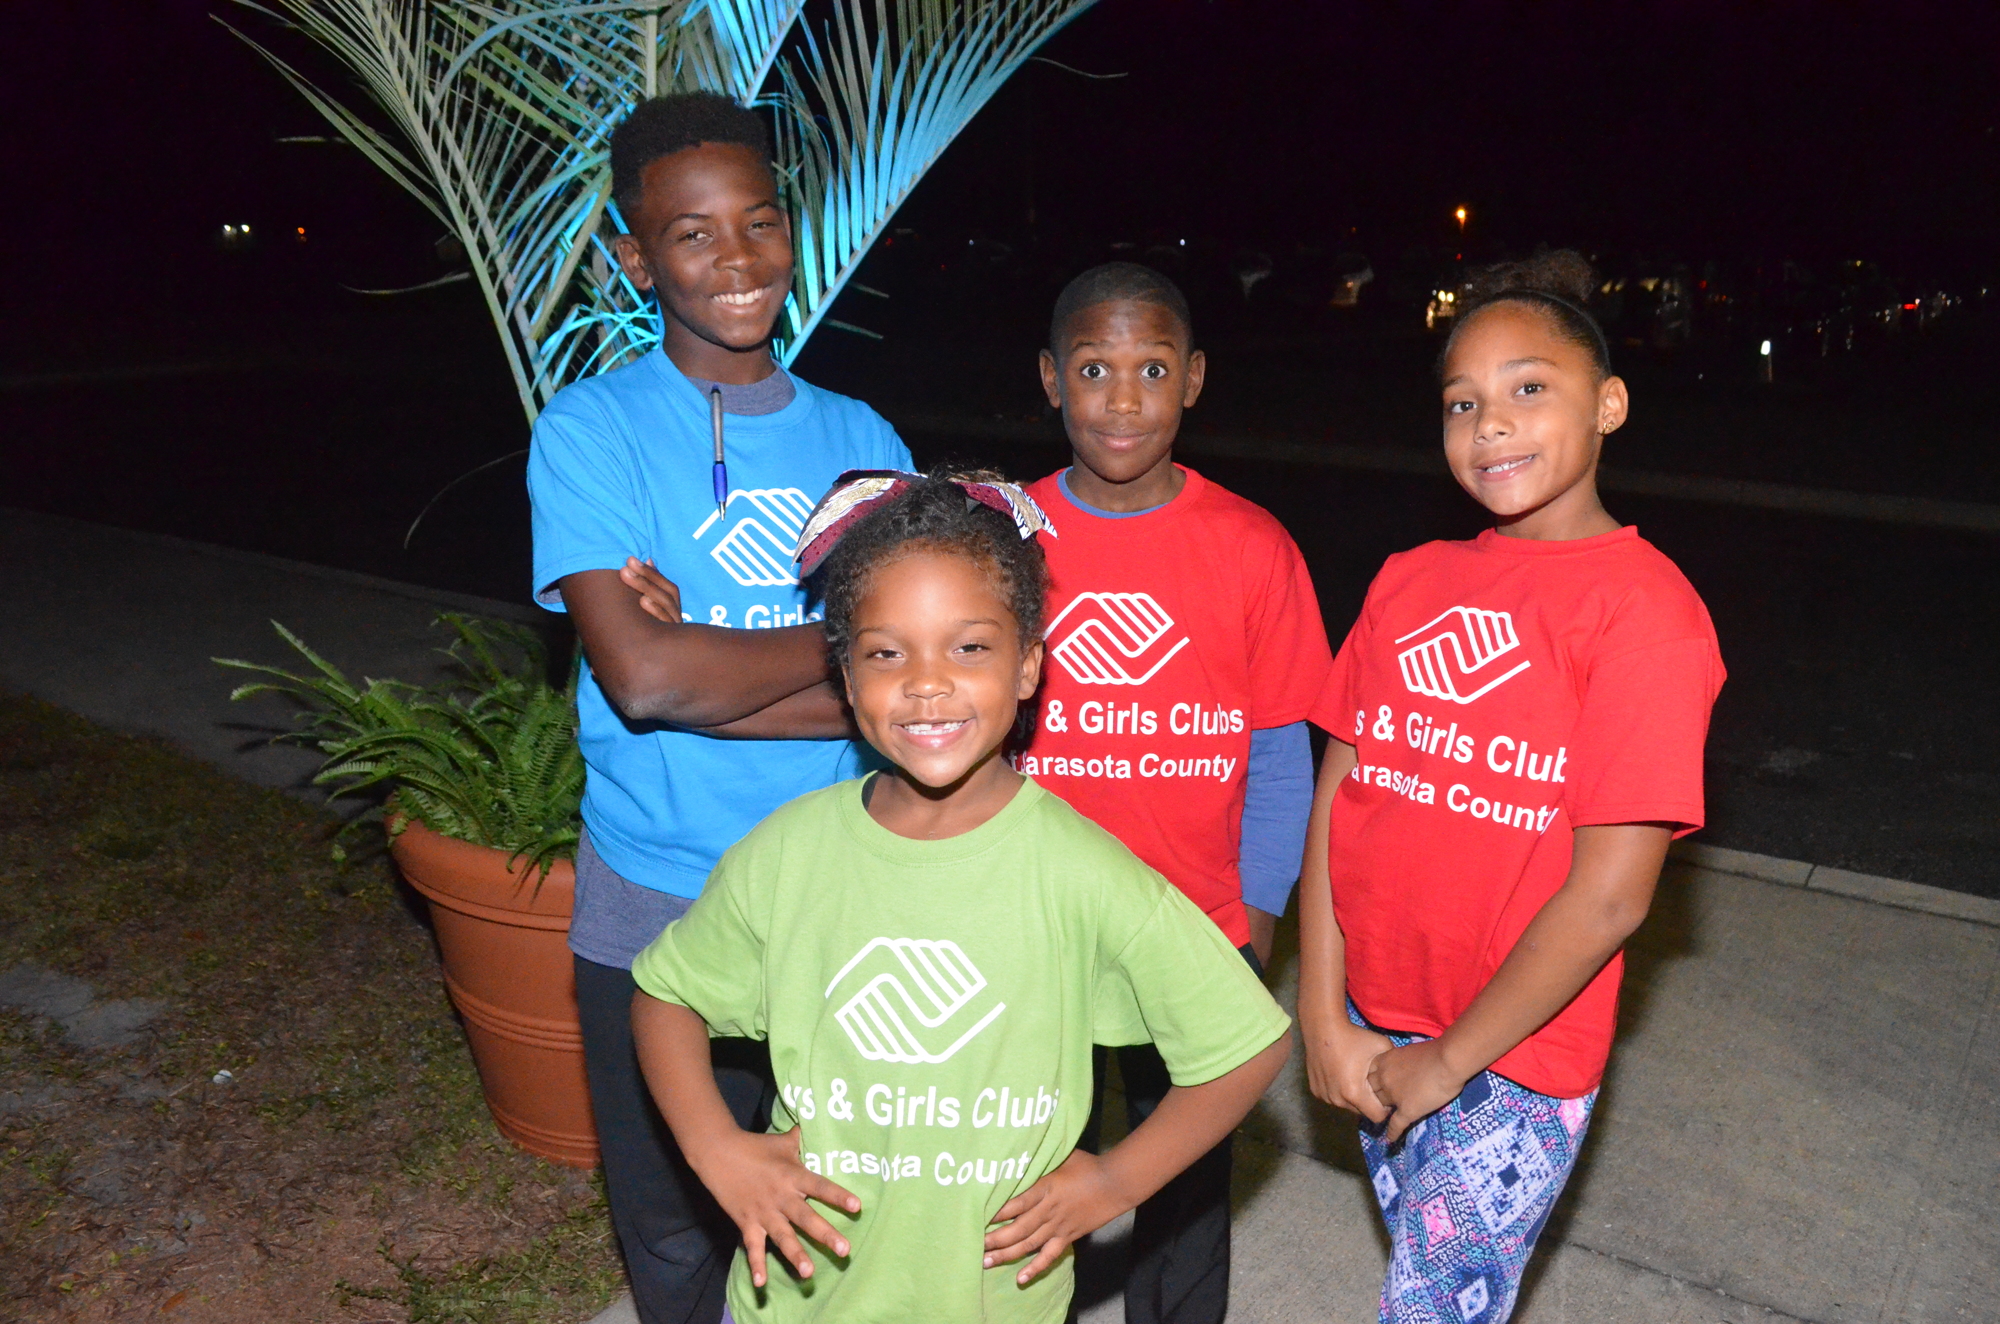 Cobie, 12, Ariana, 7, Lavondre,11, and Sydney, 10 served as the welcome/escort crew for the event. Photo by Niki Kottmann